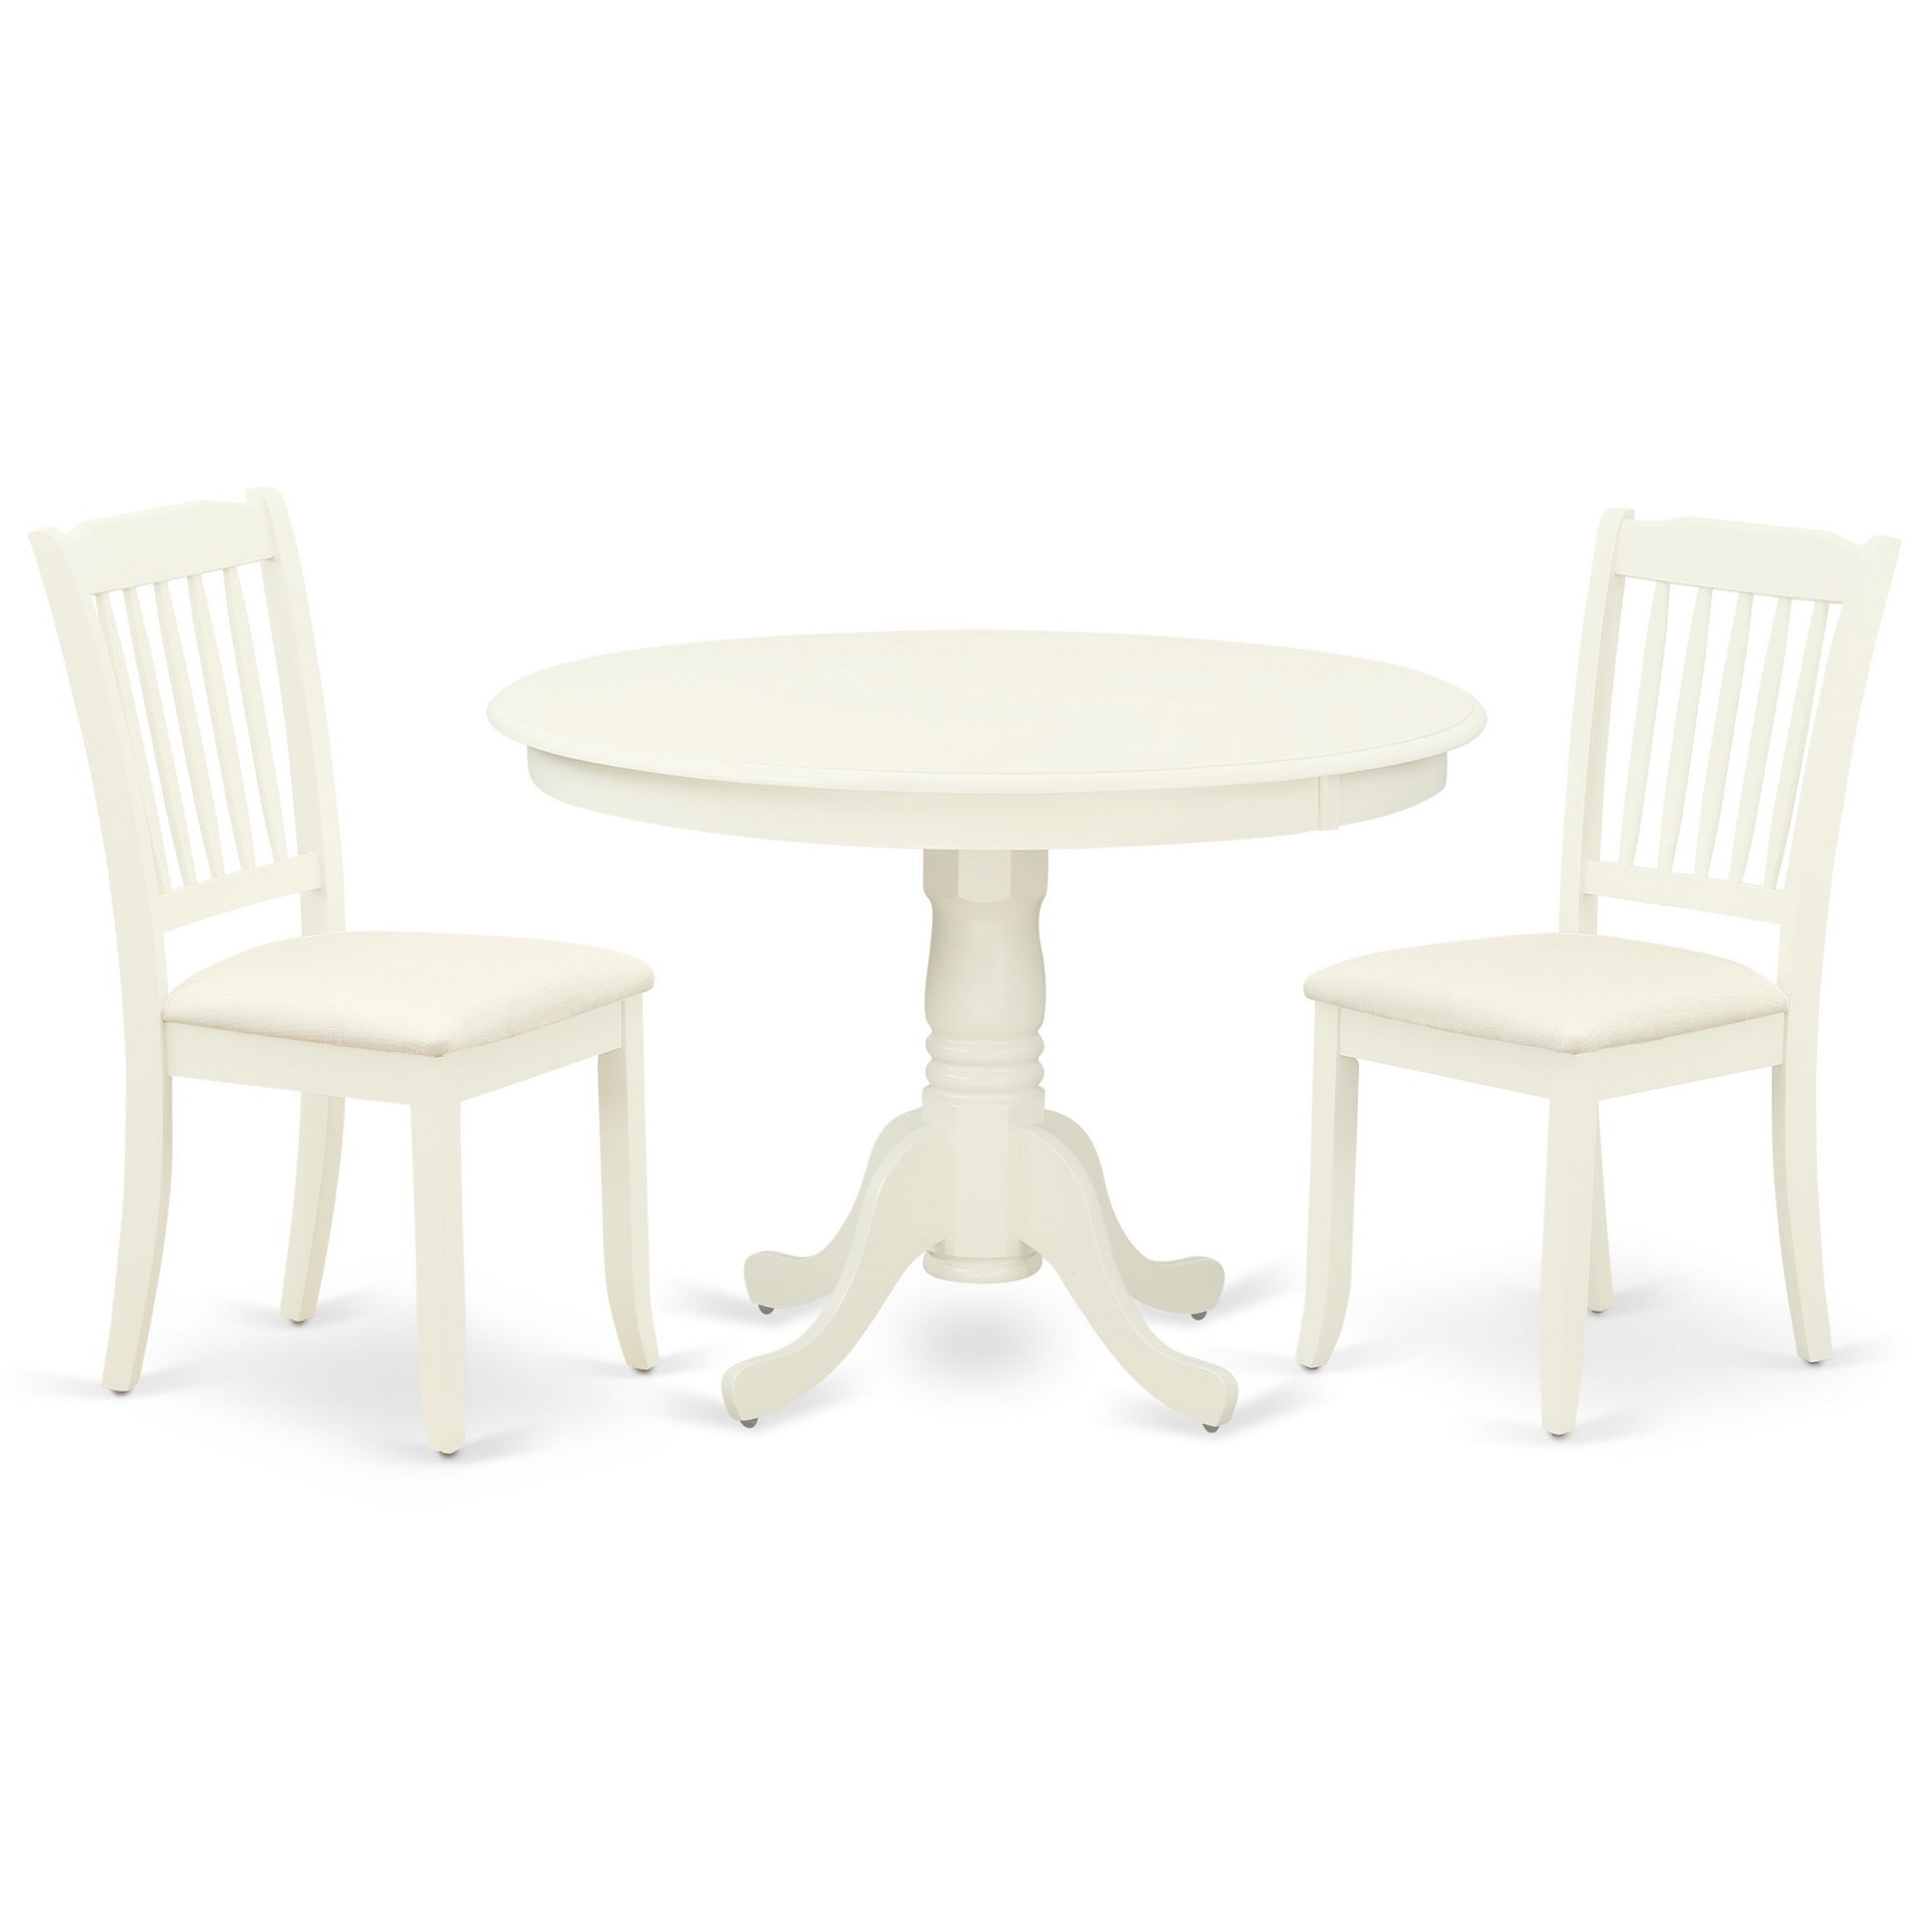 HLDA3-LWH-C 3Pc Dinette Set Includes a Rounded Kitchen Table and Two Vertical Slatted Microfiber Seat Dining Chairs, Linen White Finish